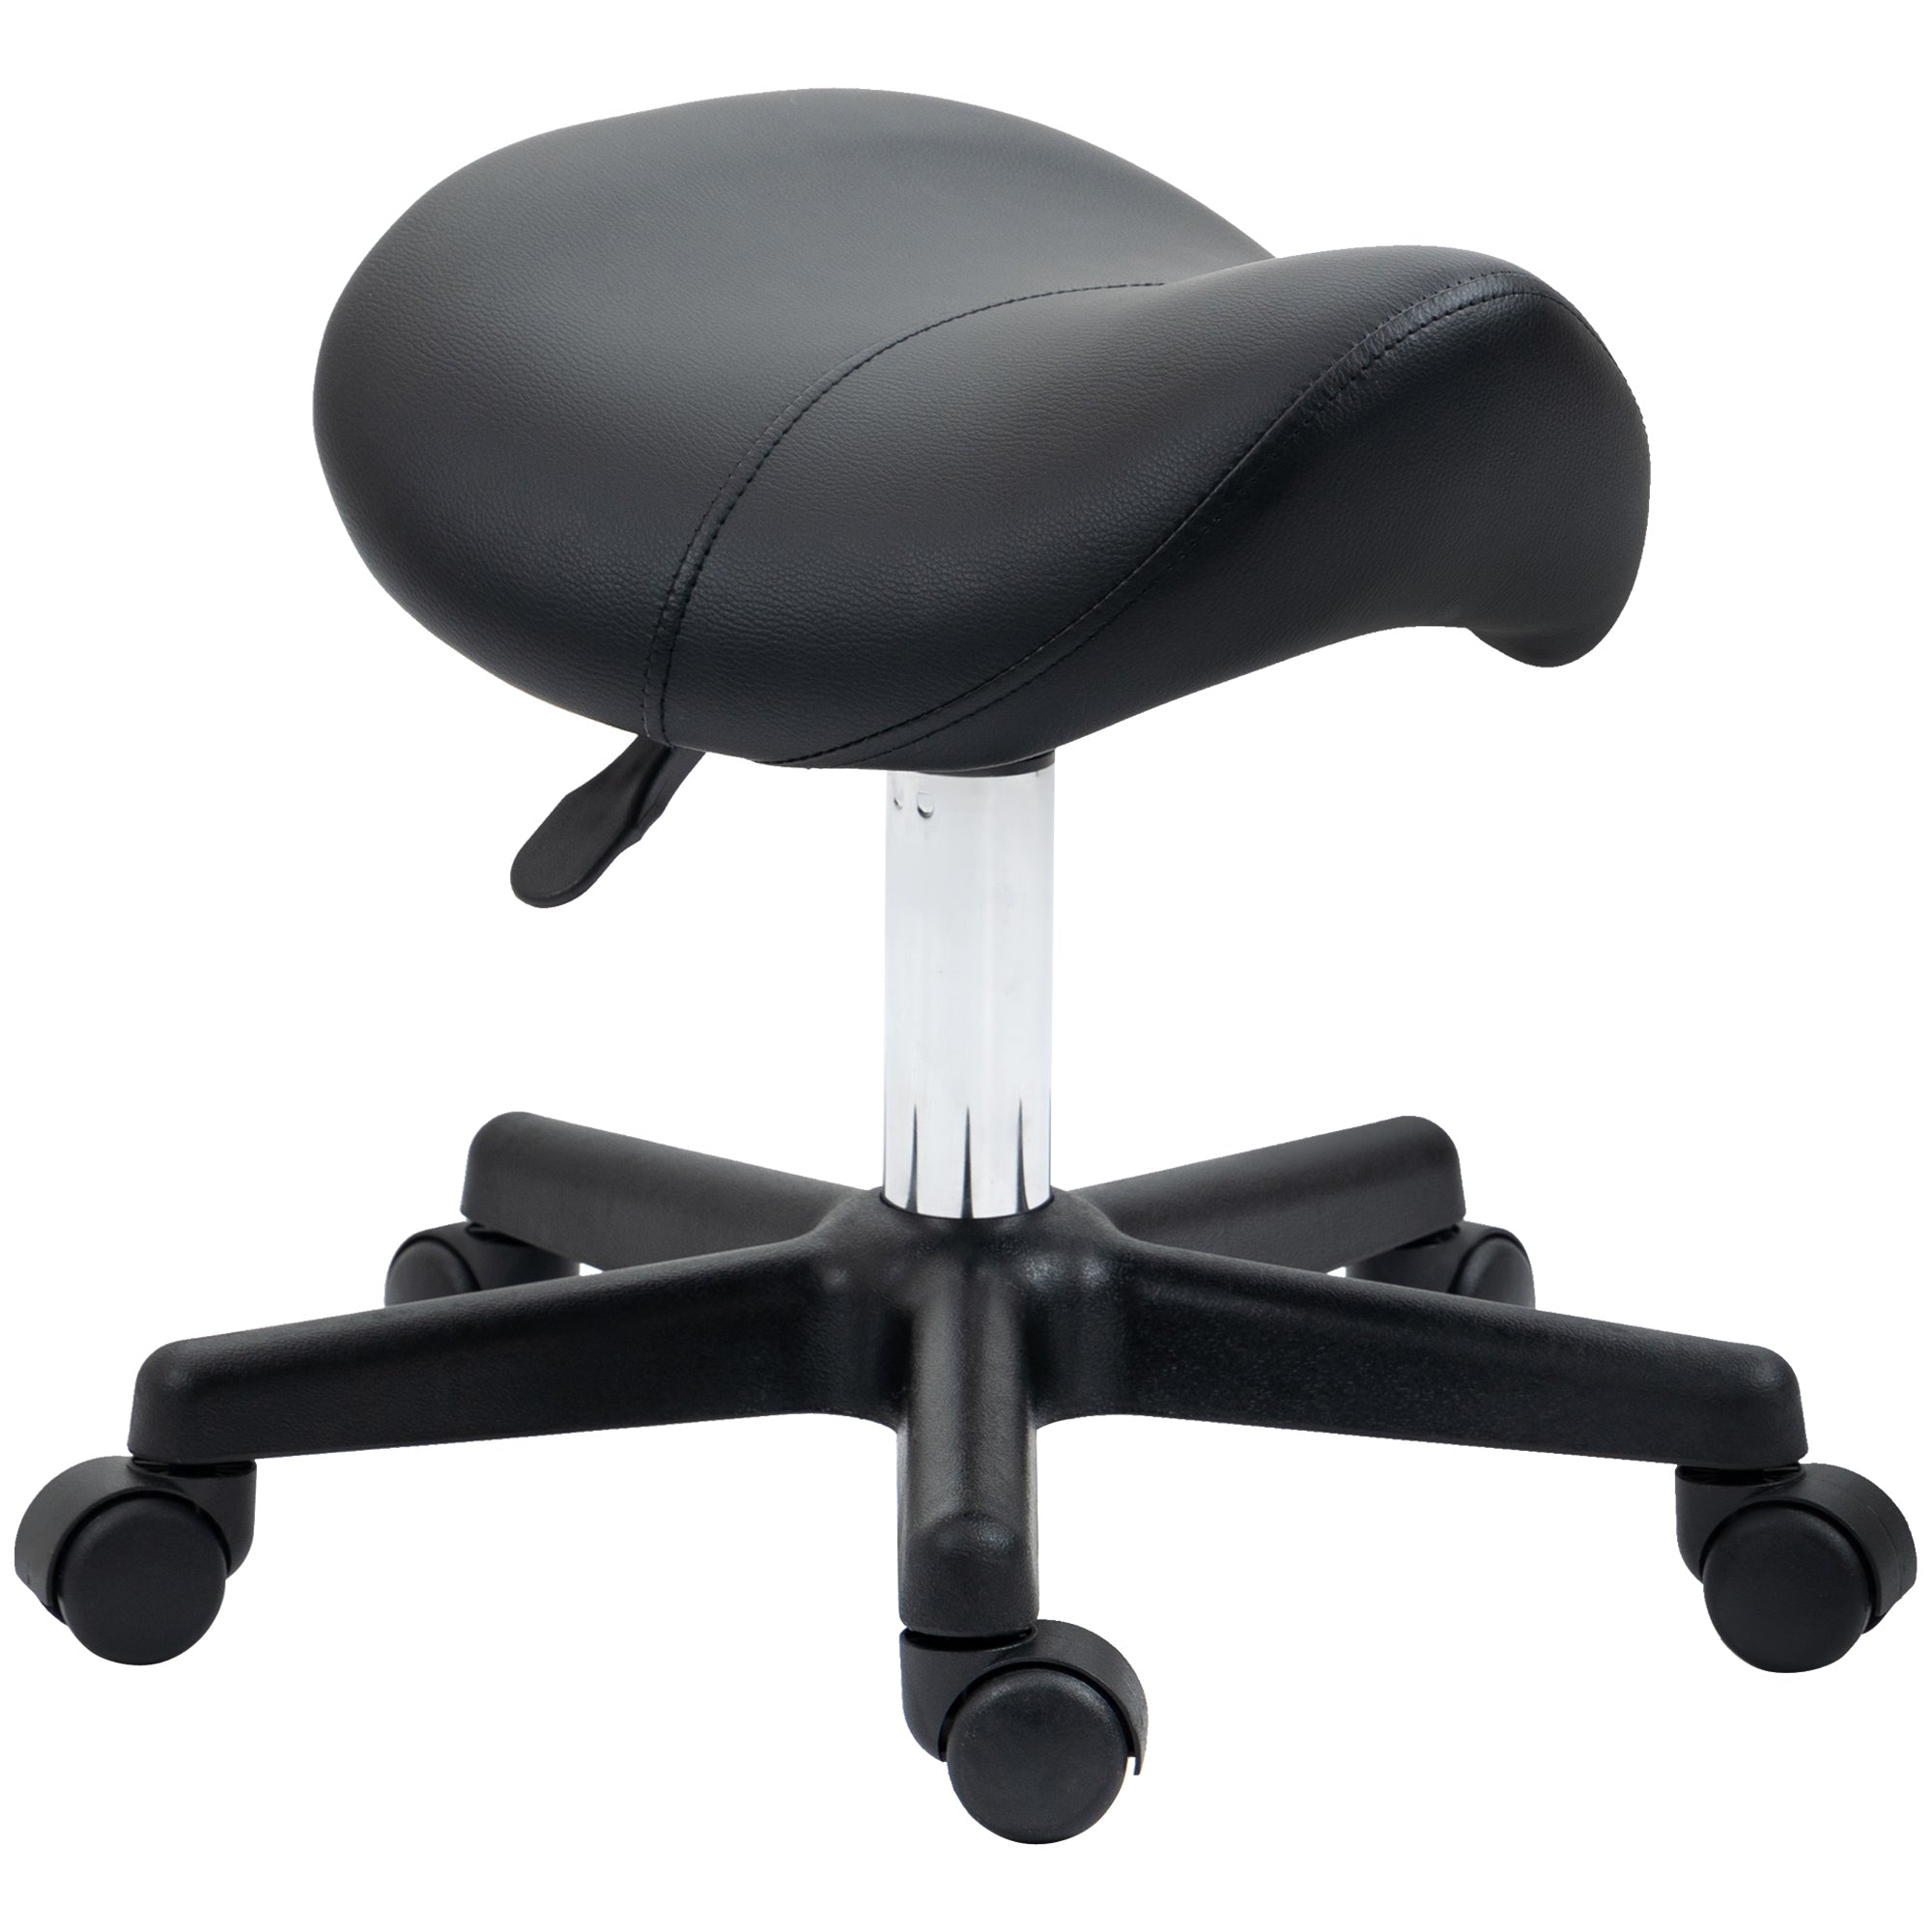 Saddle Stool, PU Leather Adjustable Rolling Salon Chair with Steel Frame for Massage, Spa, Beauty and Tattoo, Black-0